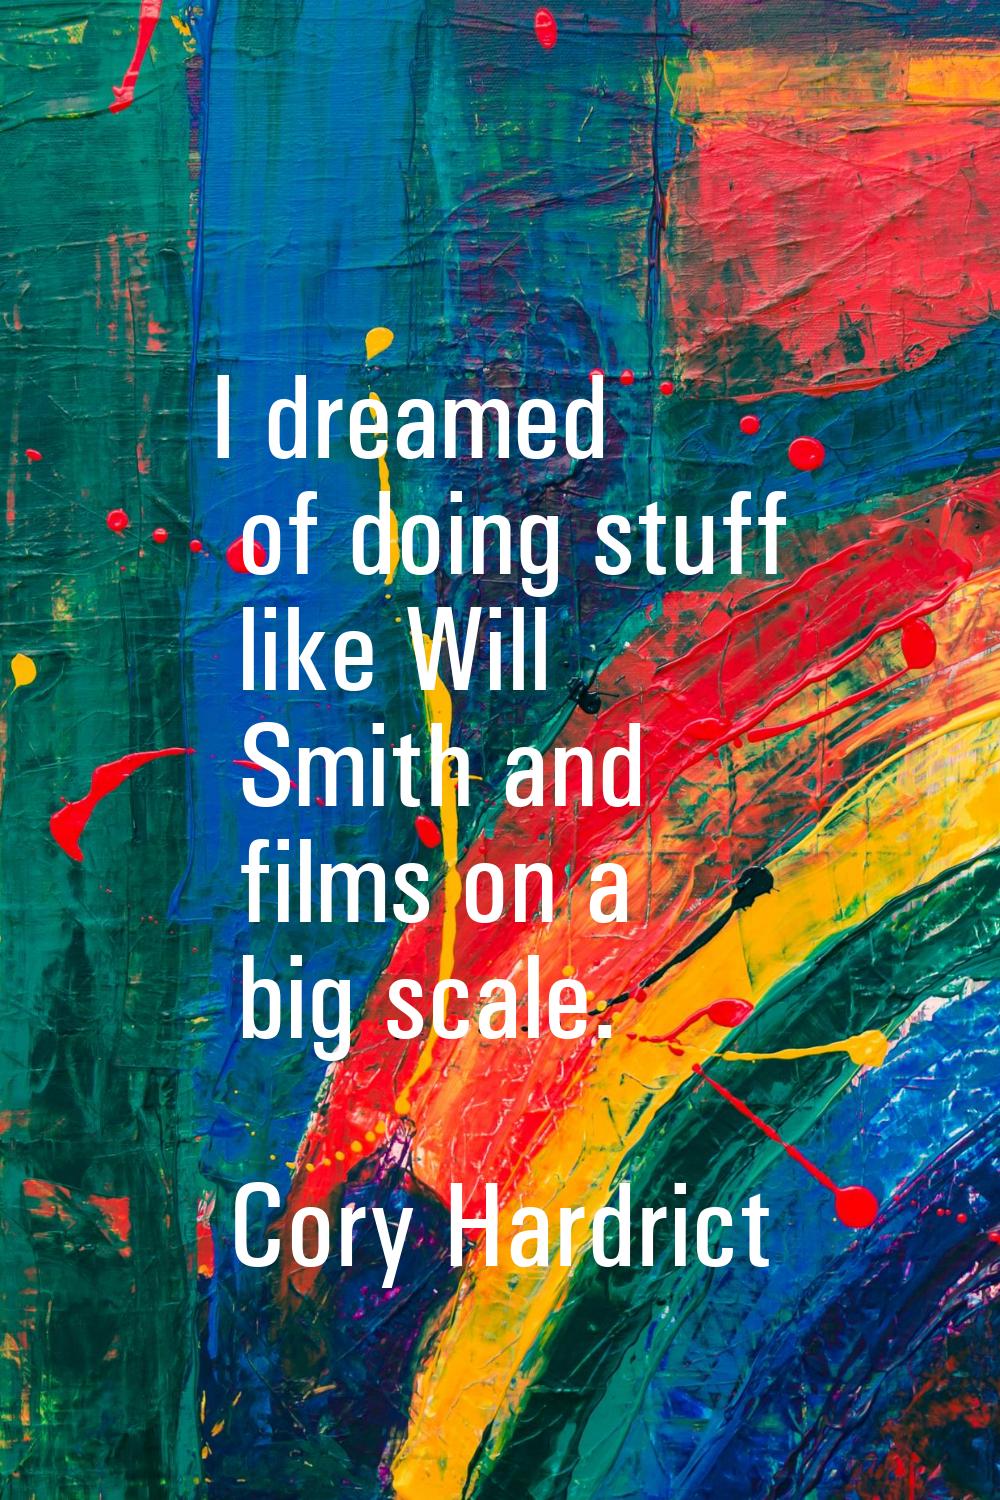 I dreamed of doing stuff like Will Smith and films on a big scale.